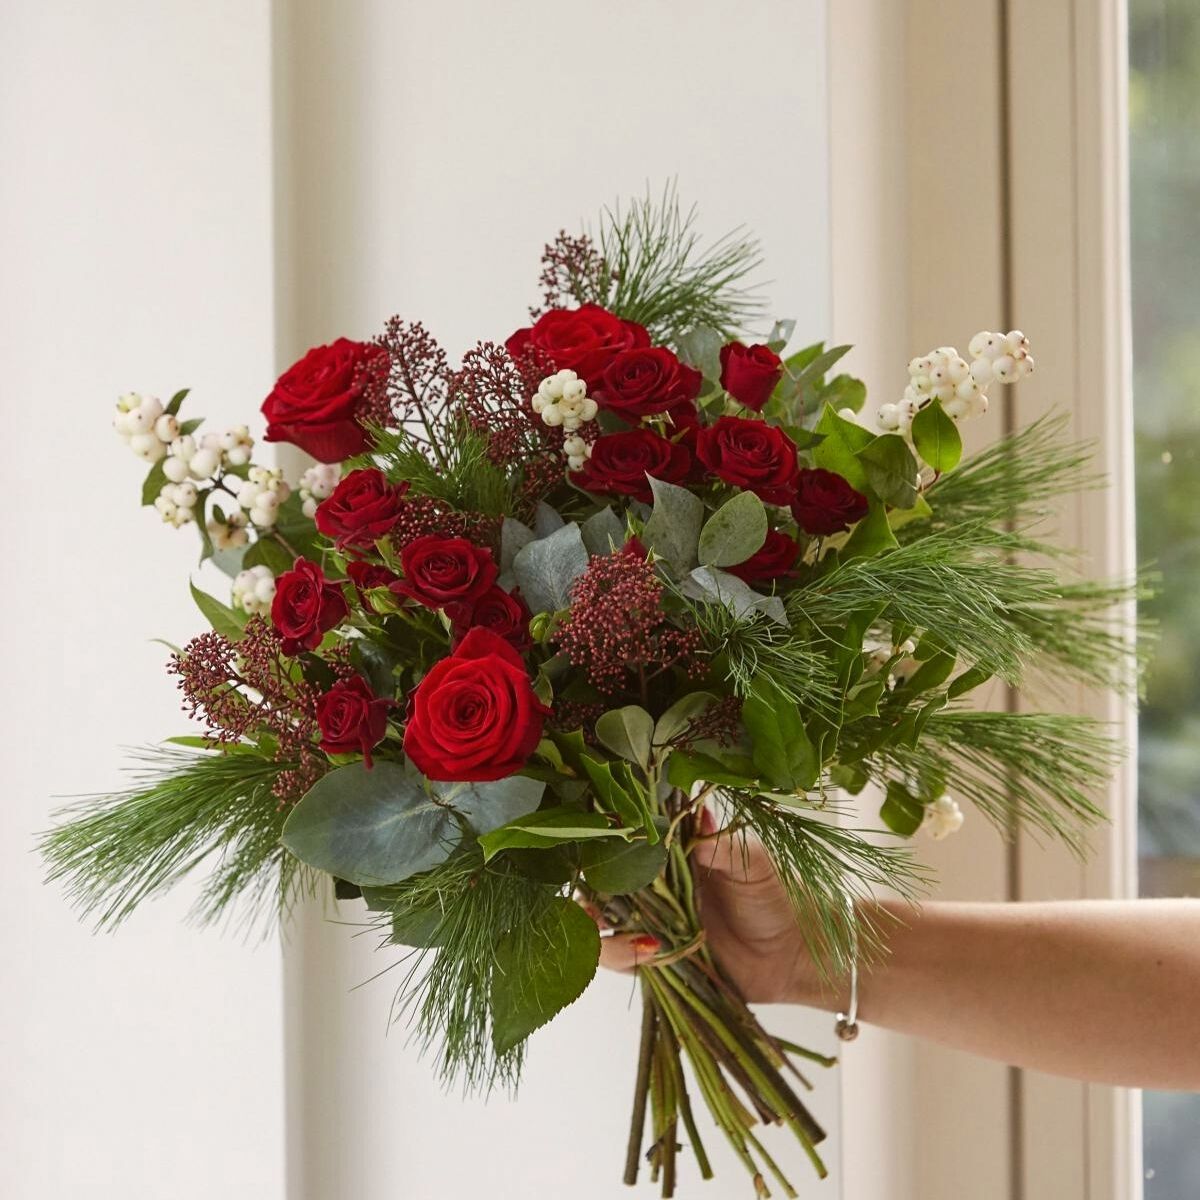 Creating a xmas flower guide is a good tip to increase sales on Thursd